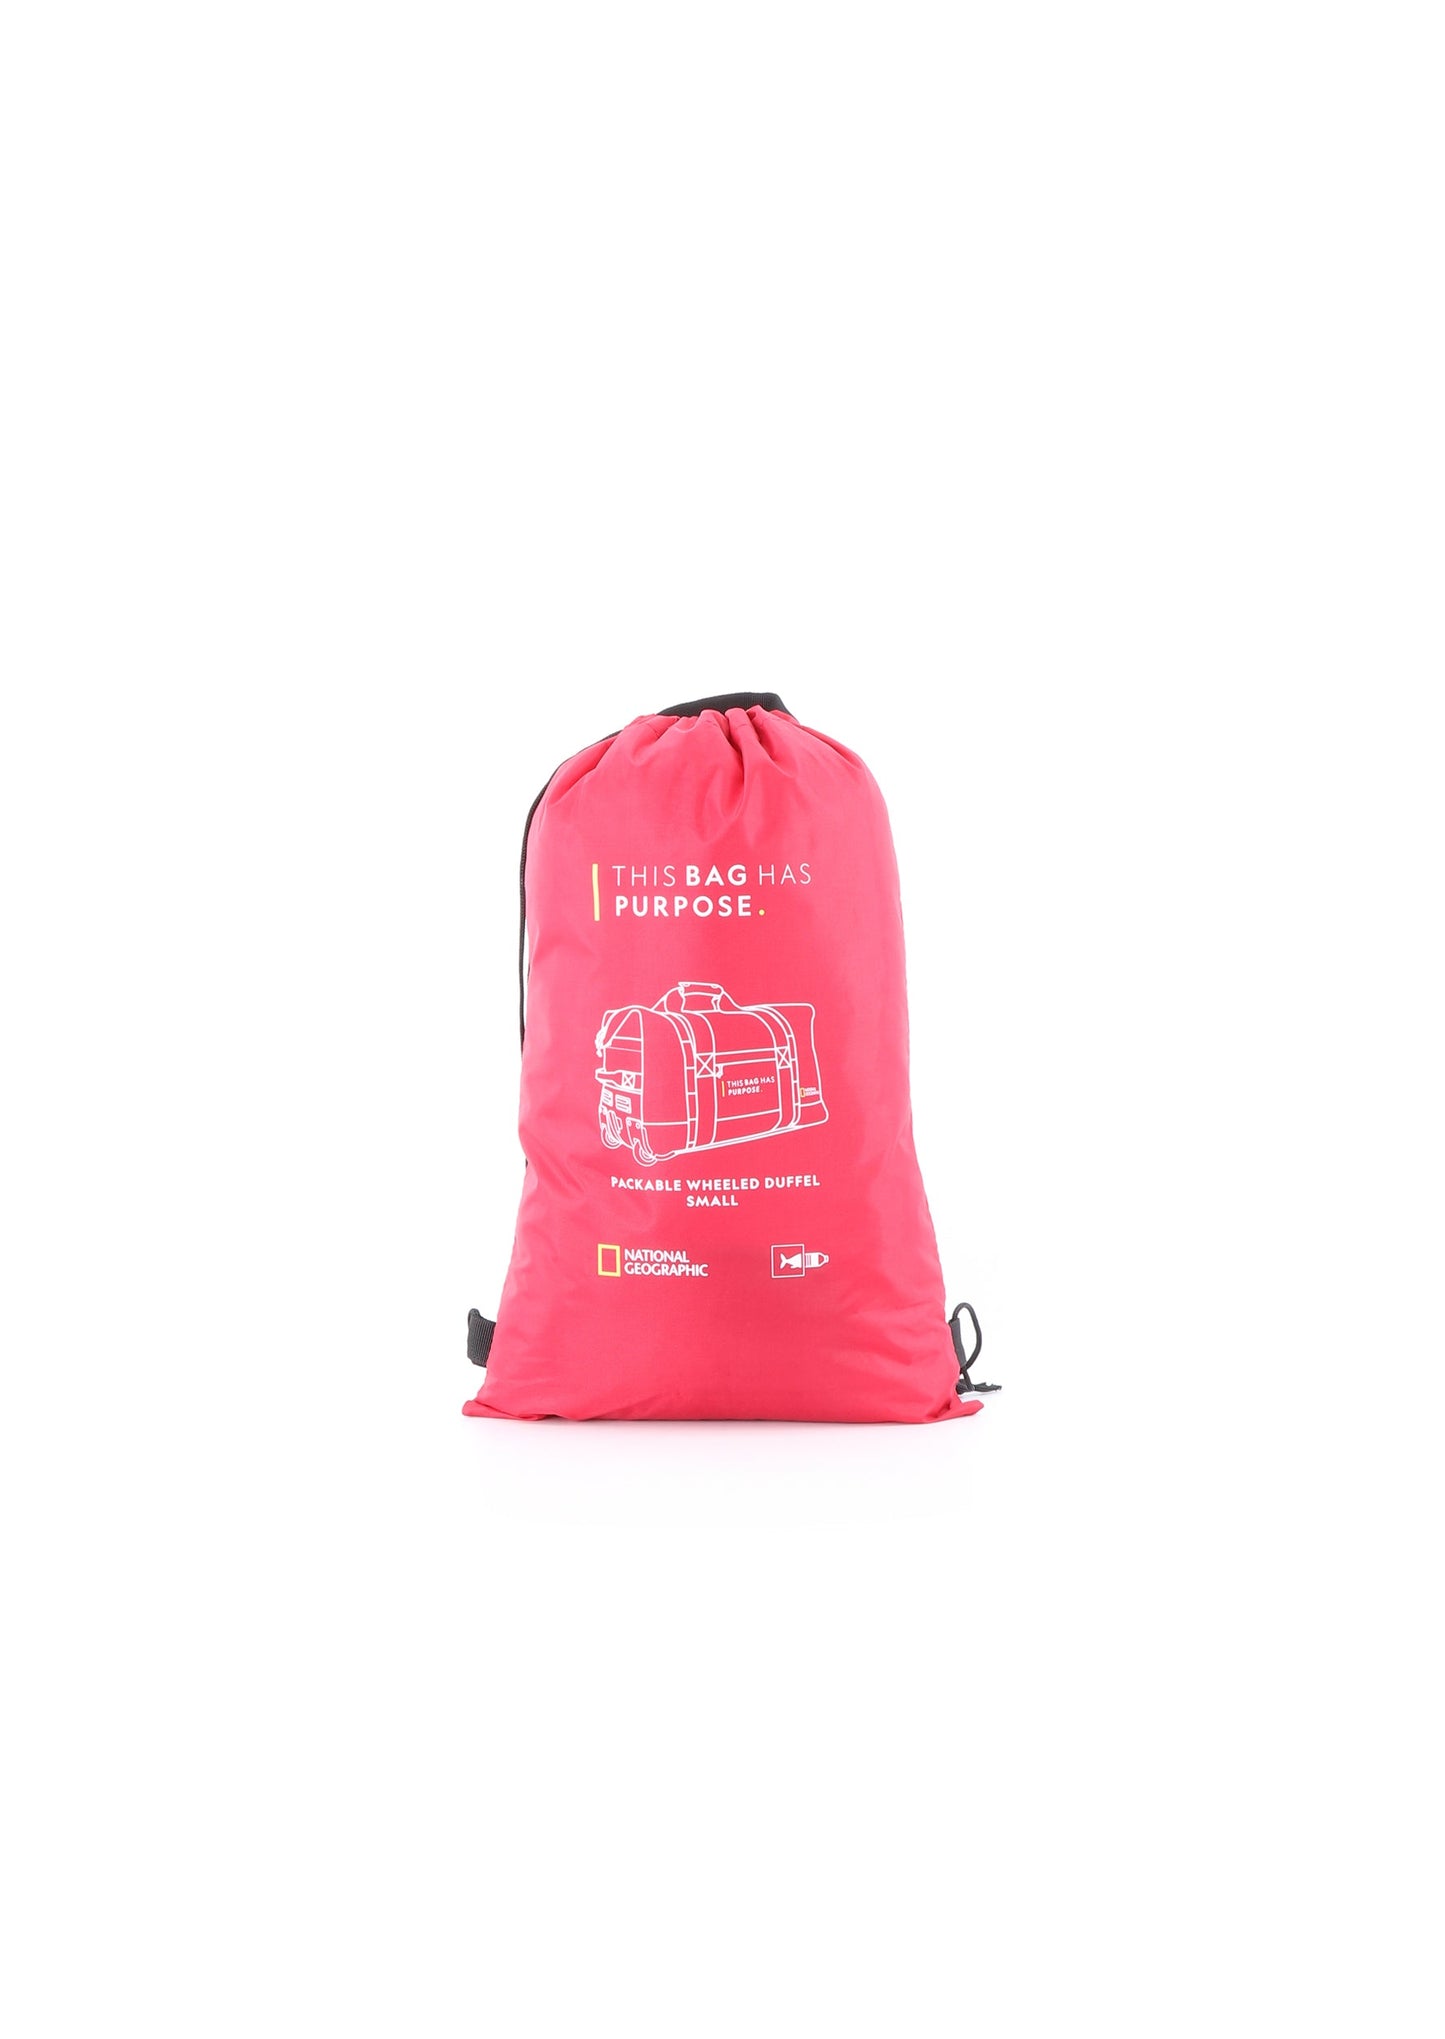 National Geographic Pathway S - Voorkant Rood opvouw tas | luggage4u.be